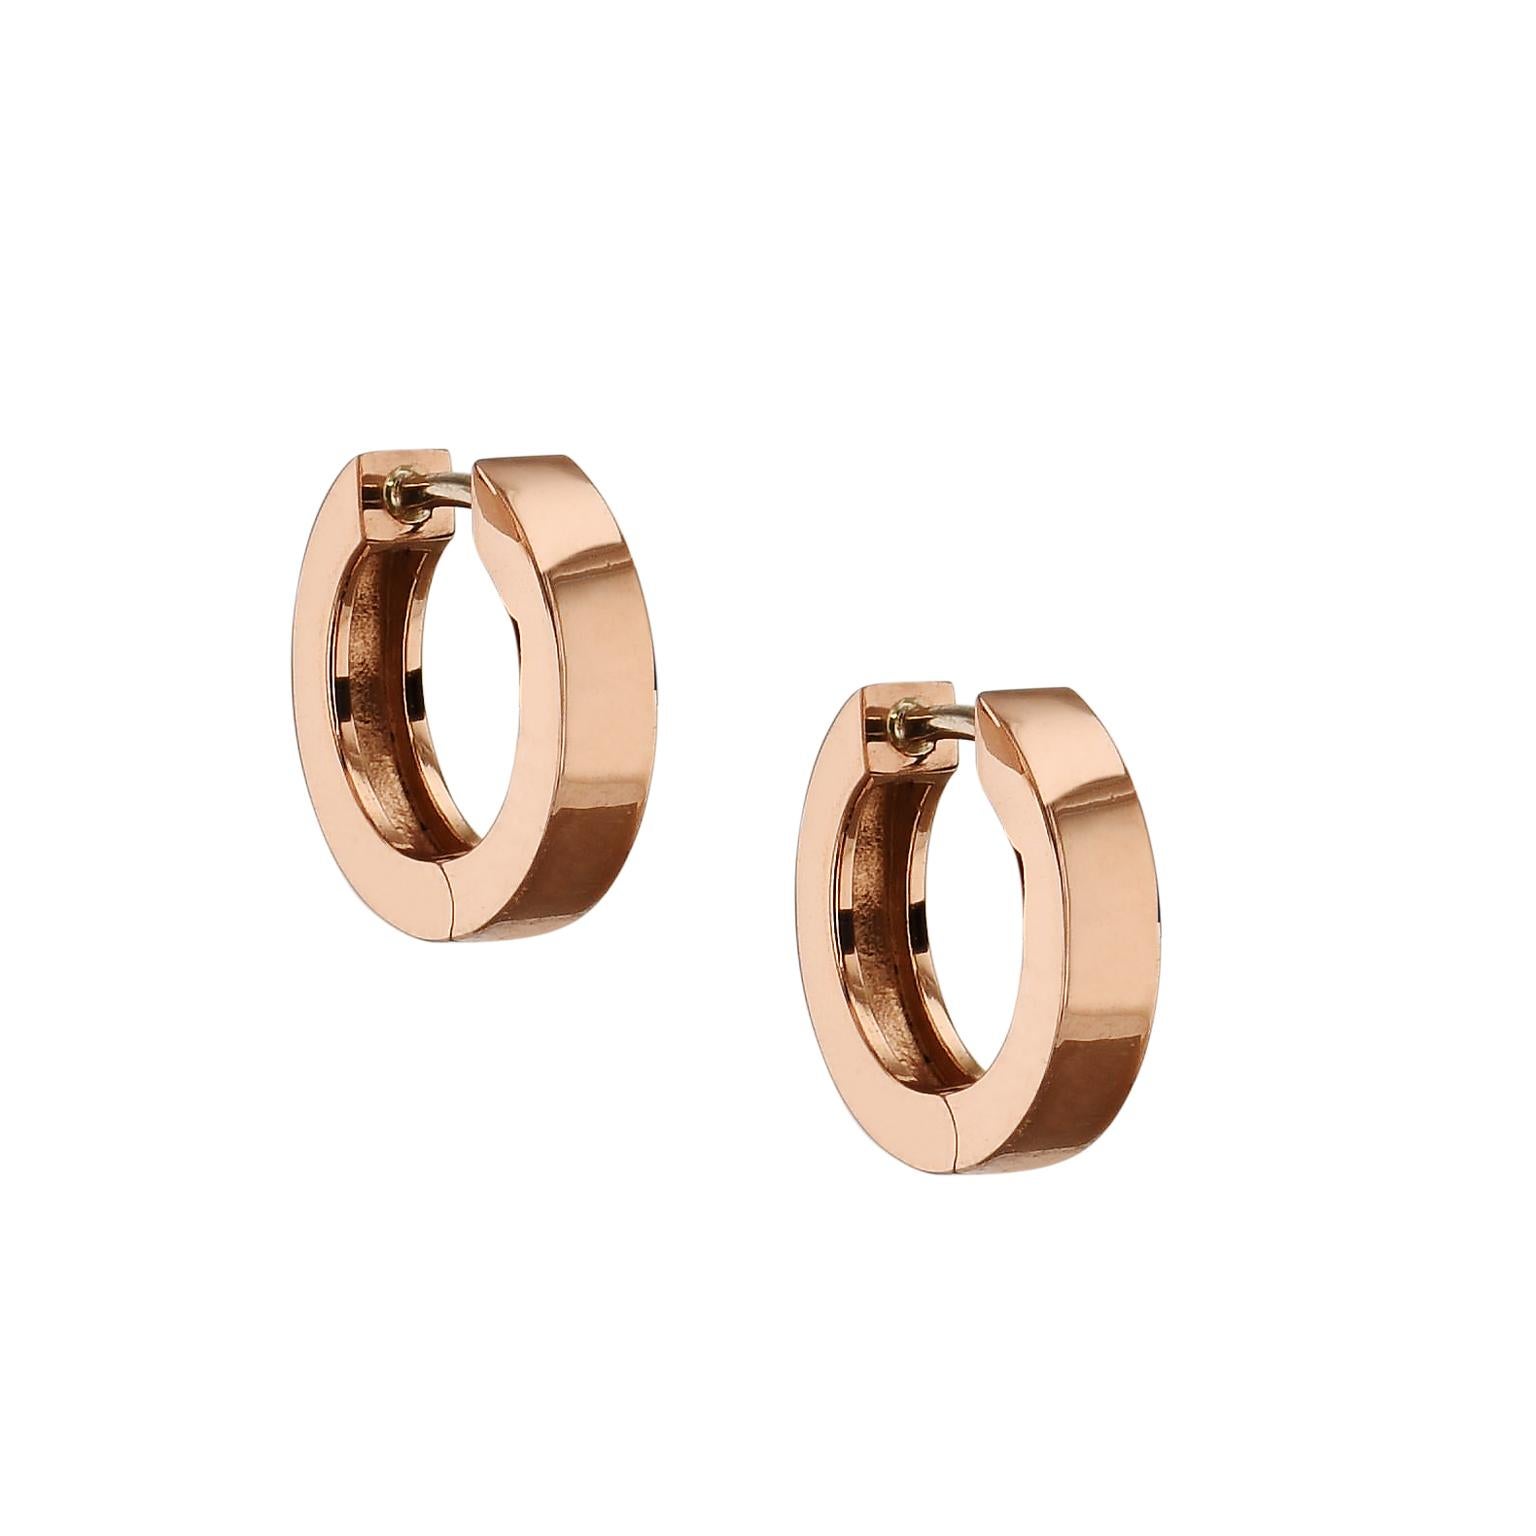 Round Cut Diamond with 18 karat Rose Gold Finished with Black Rhodium Hoop Hugger Earrings